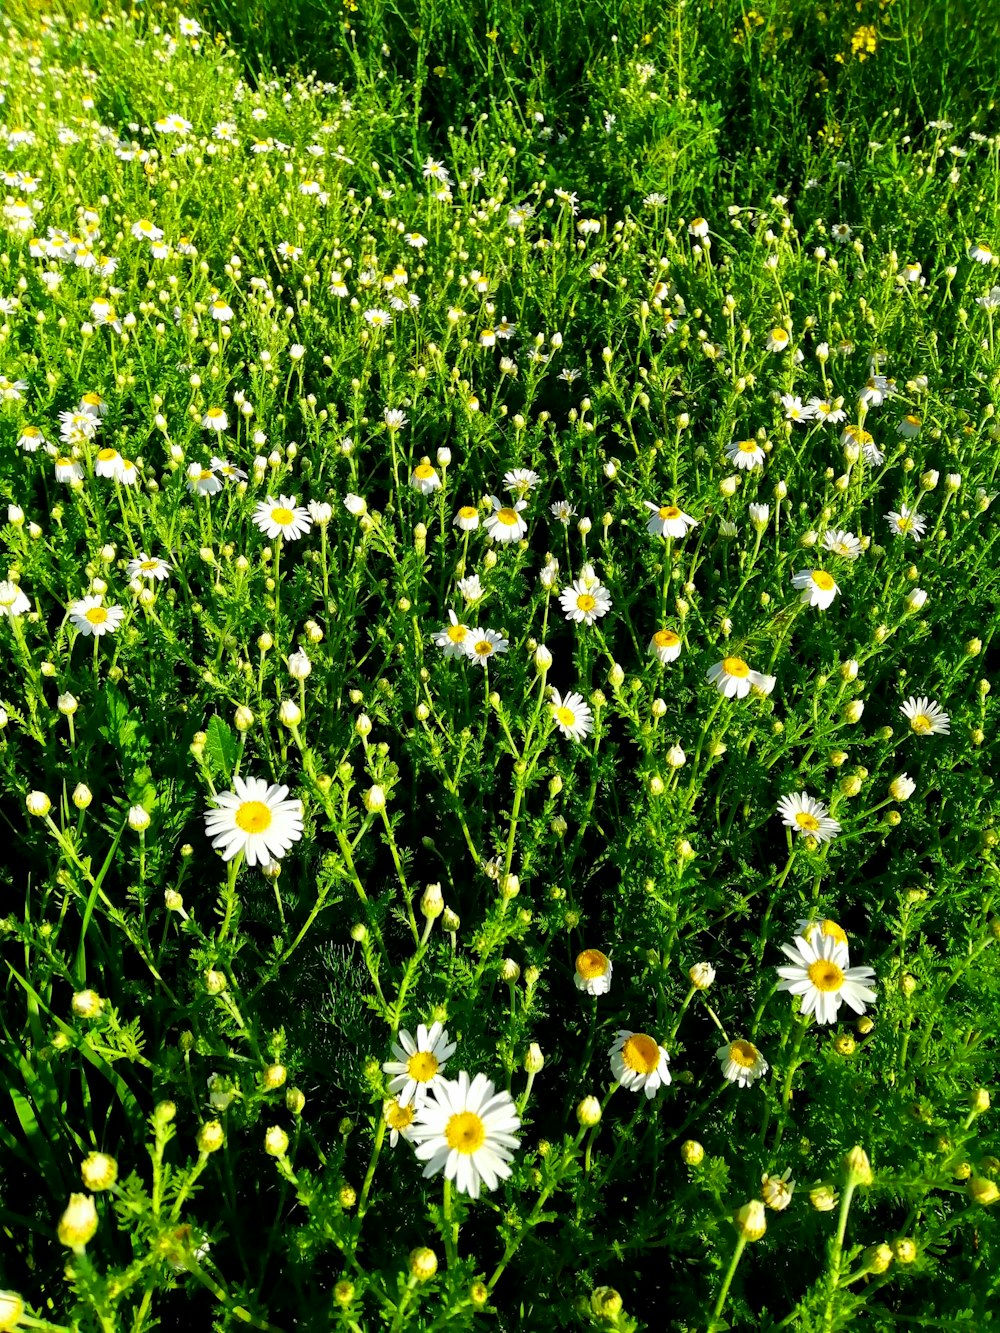 white and yellow flowers on green grass field